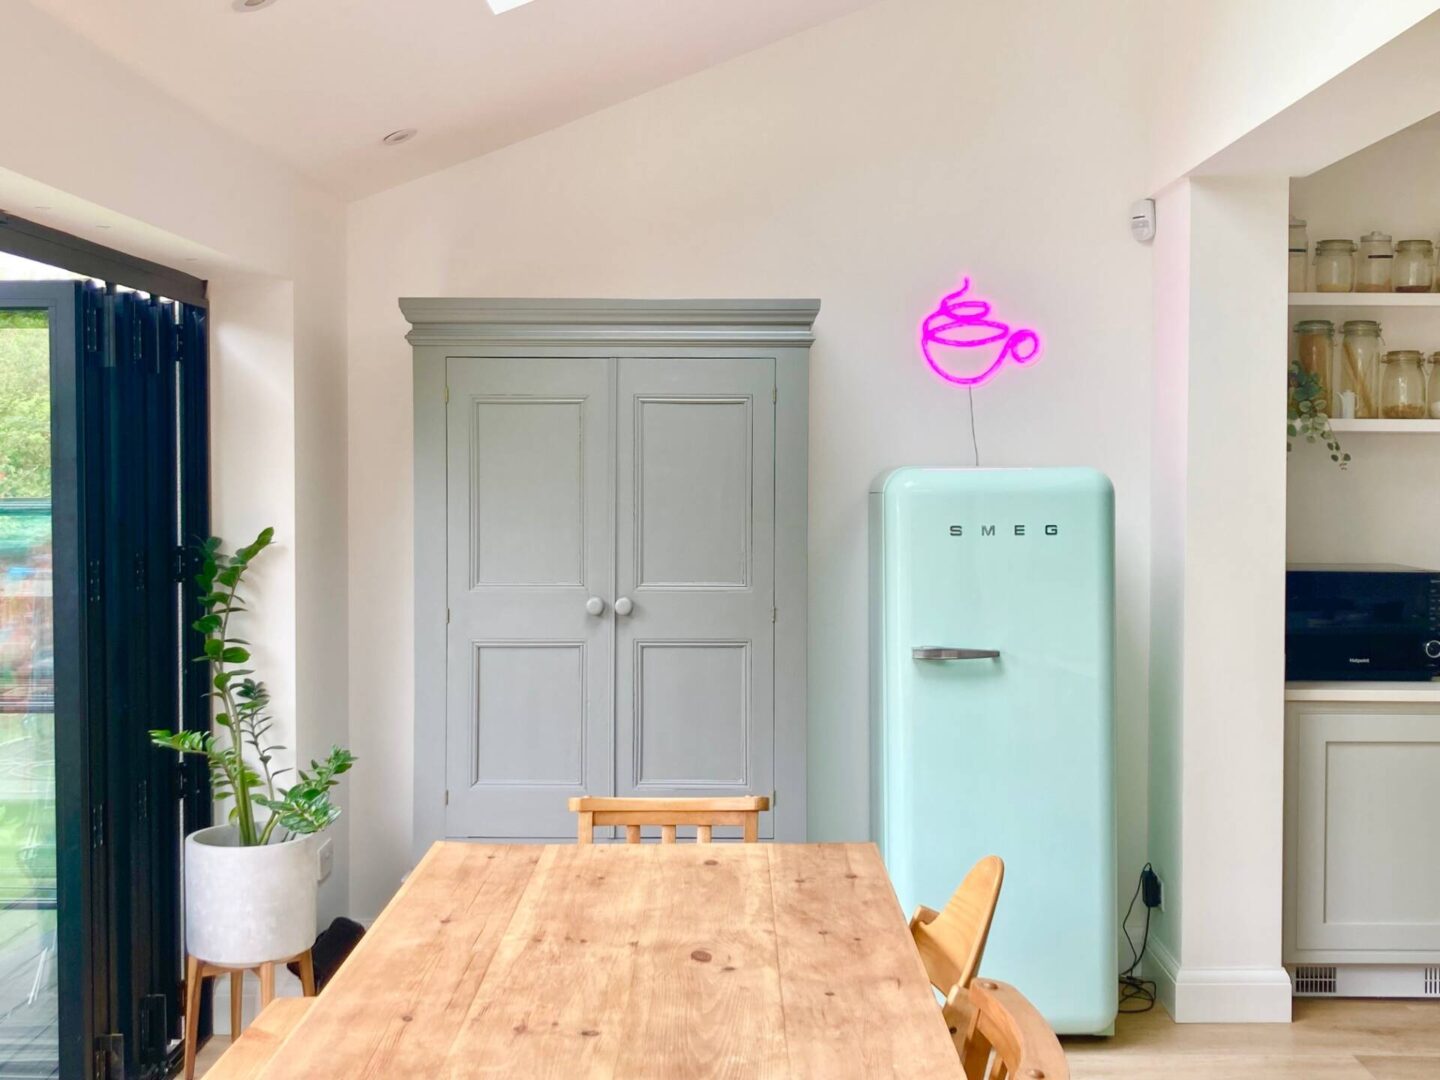 A touch of neon for our kitchen – NEON87 Light Review (Ad)